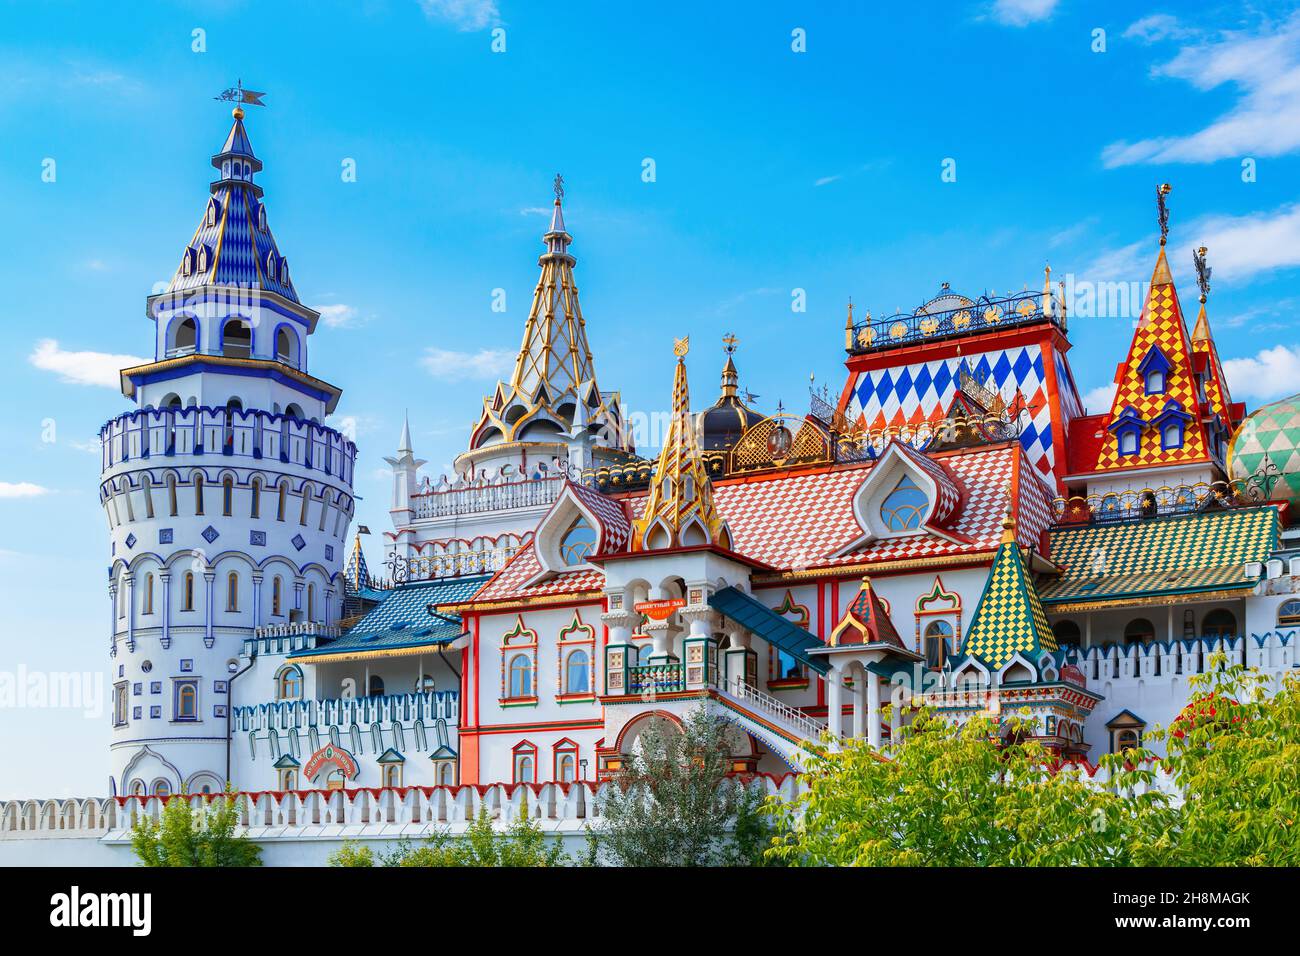 The disclosure of the Russian soul and the embodiment of Russian fairy tales in the architecture of the Izmailovo Kremlin. Moscow, Russia. Stock Photo